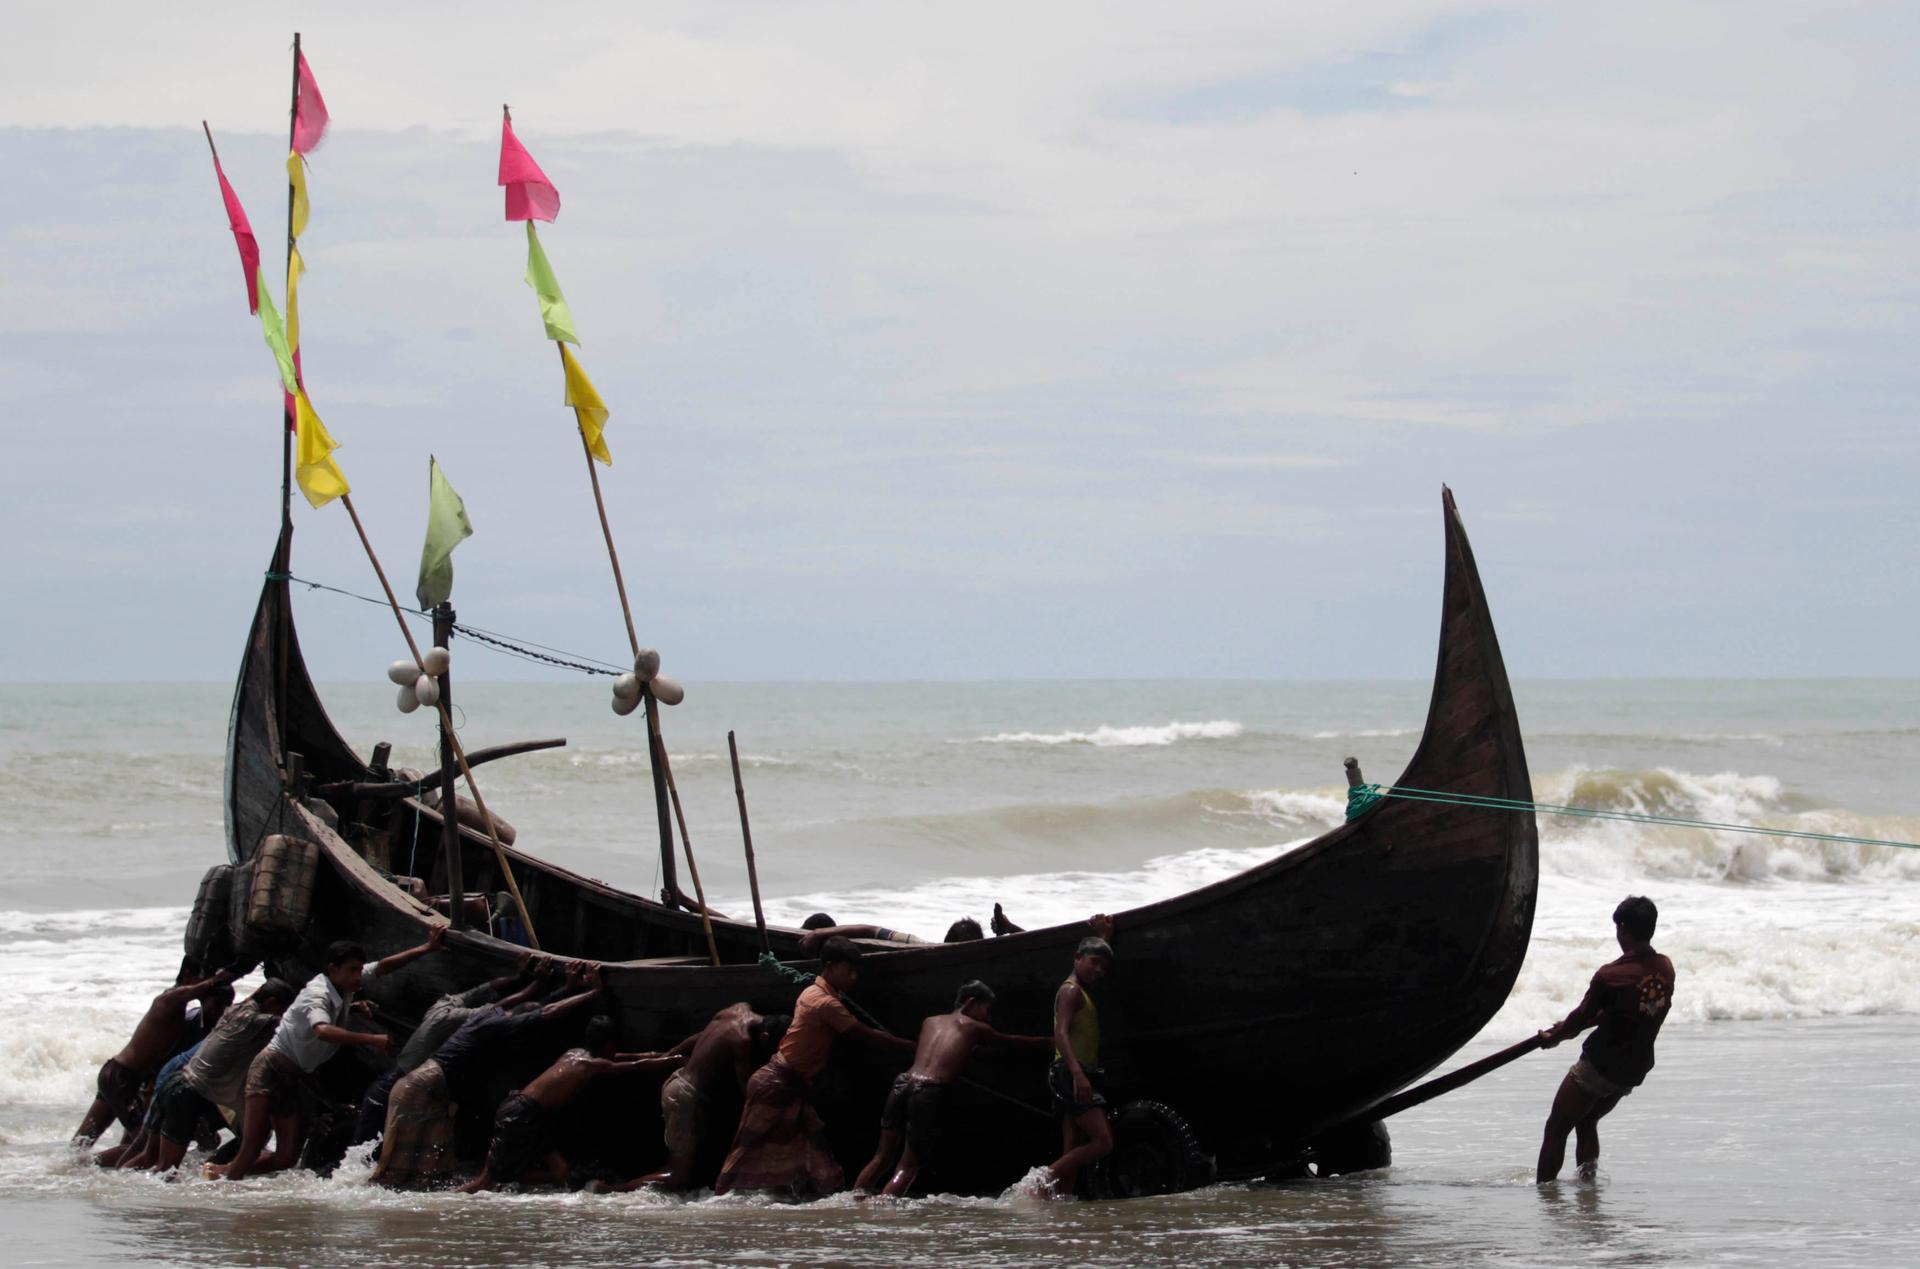 Rohingya fishermen pull a boat near a refugee camp in Cox's Bazar, Aug. 19, 2011.